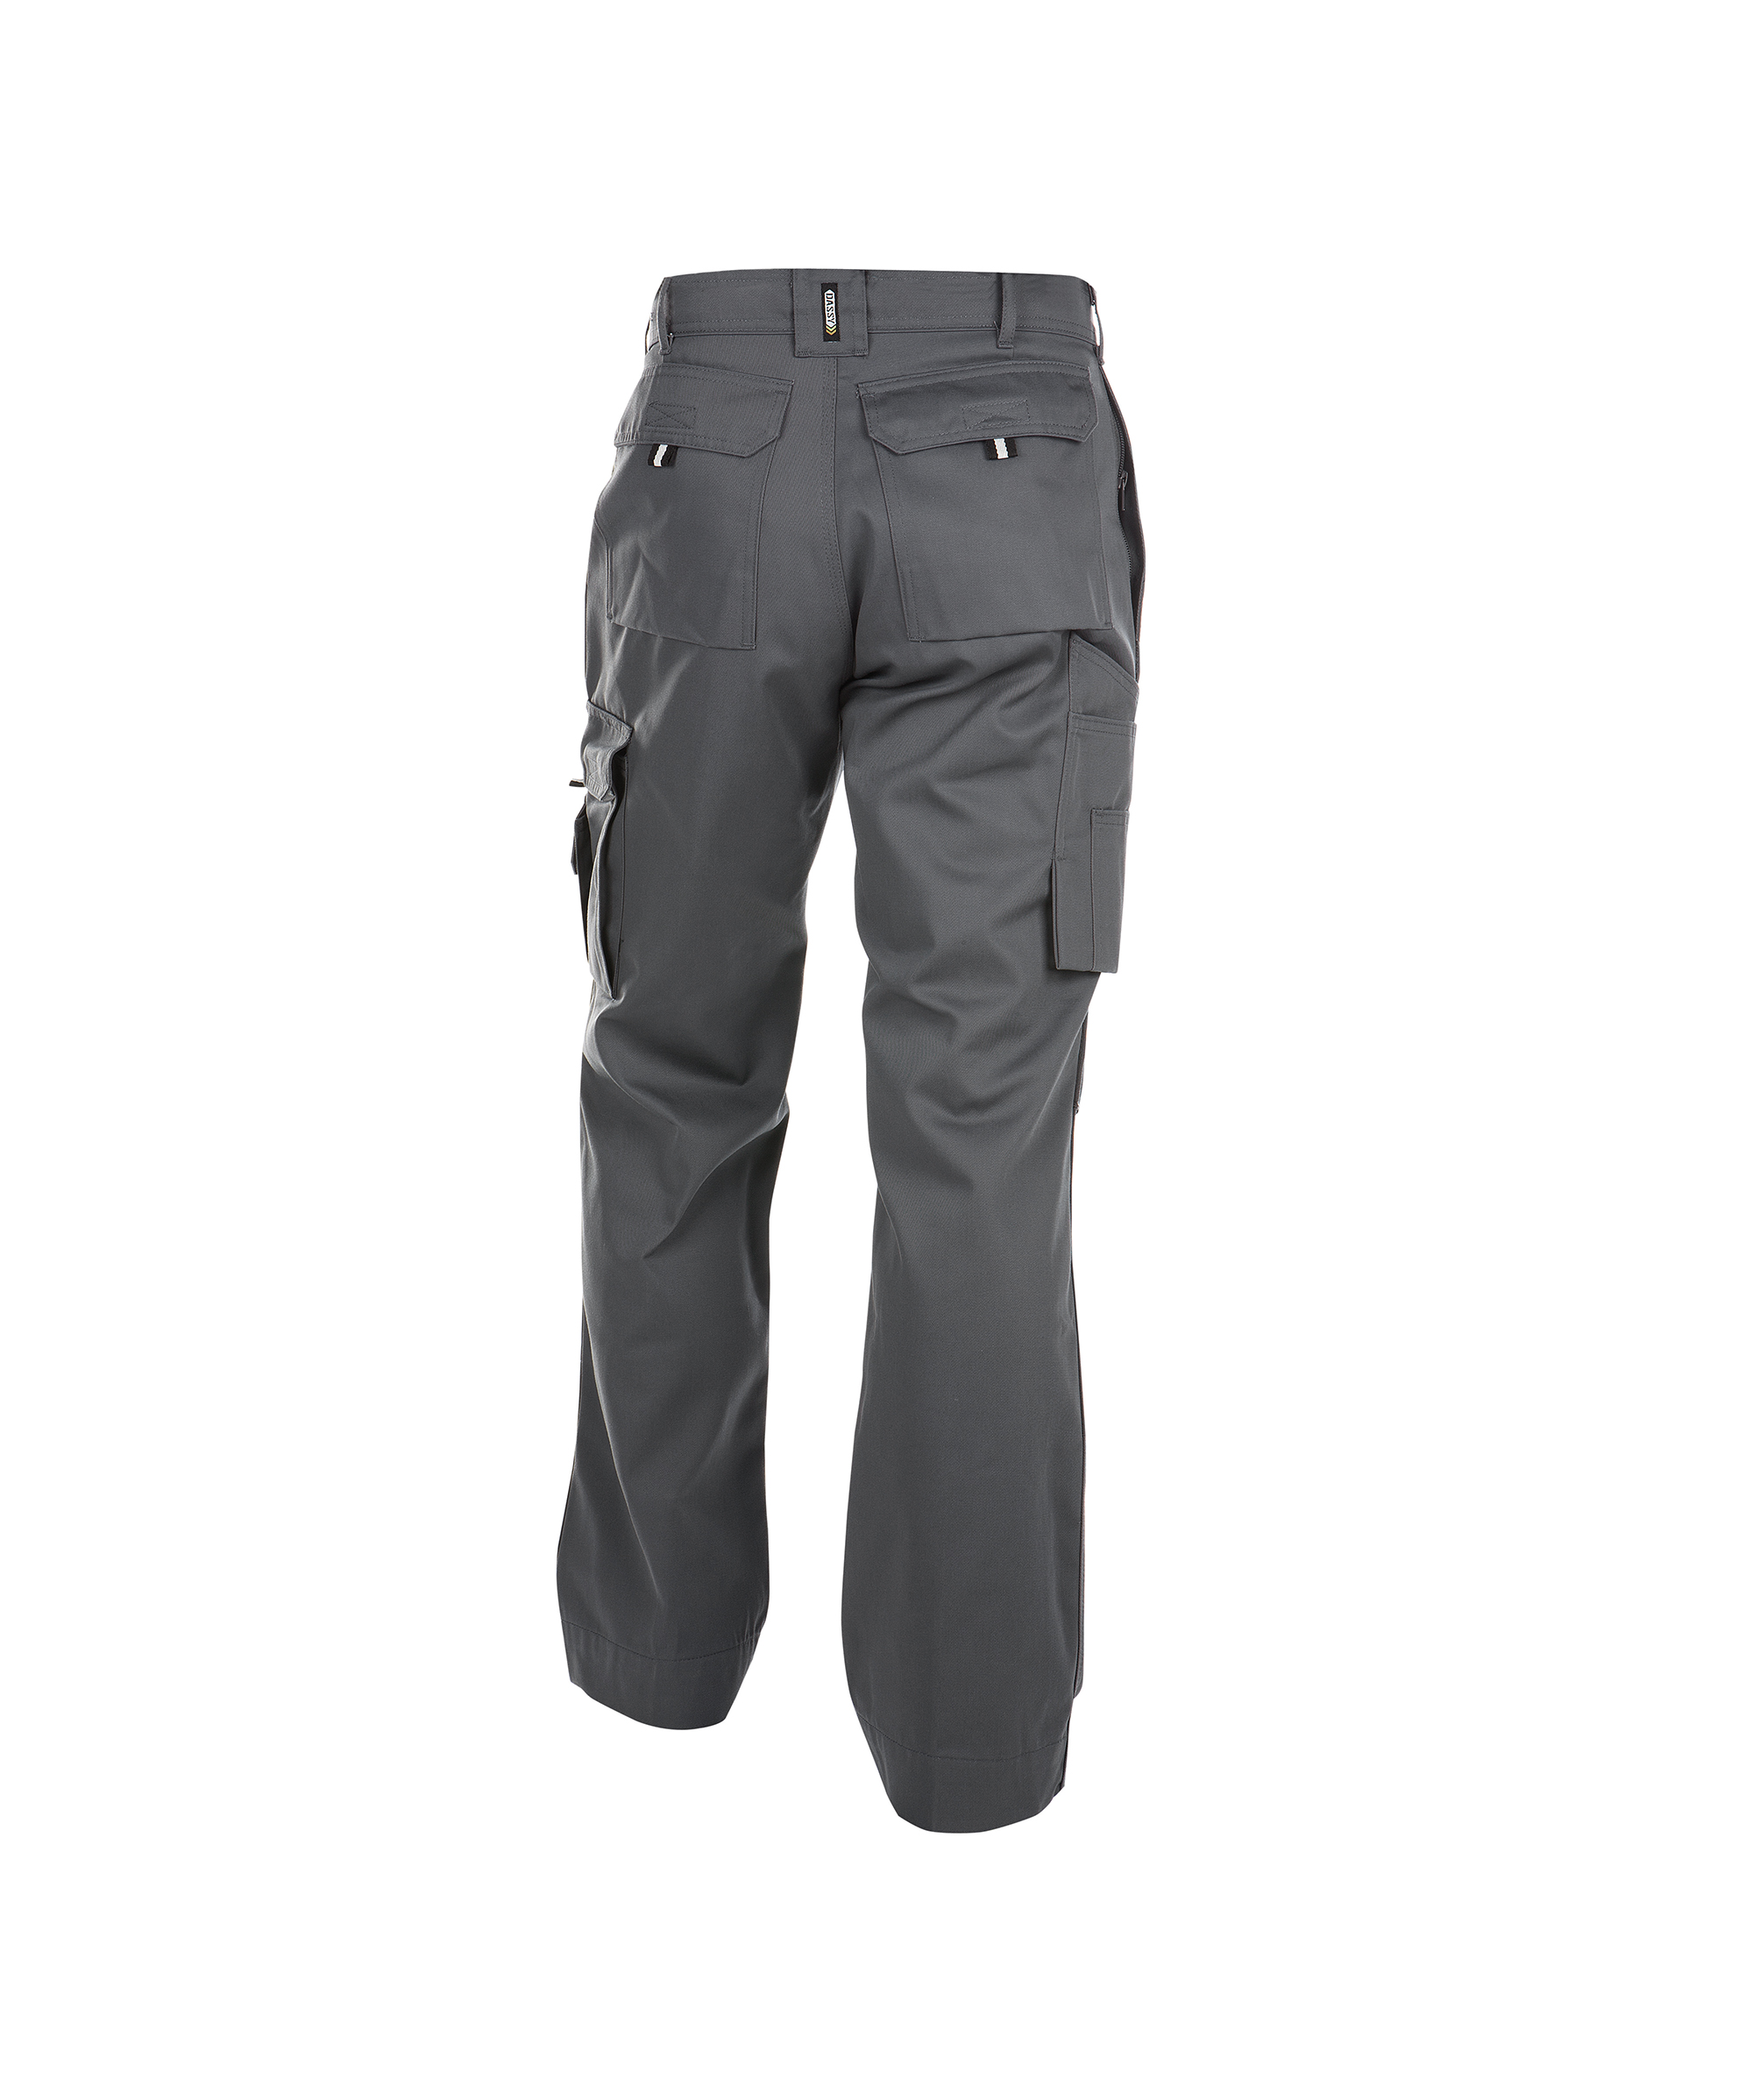 miami_work-trousers-with-knee-pockets_cement-grey_back.jpg